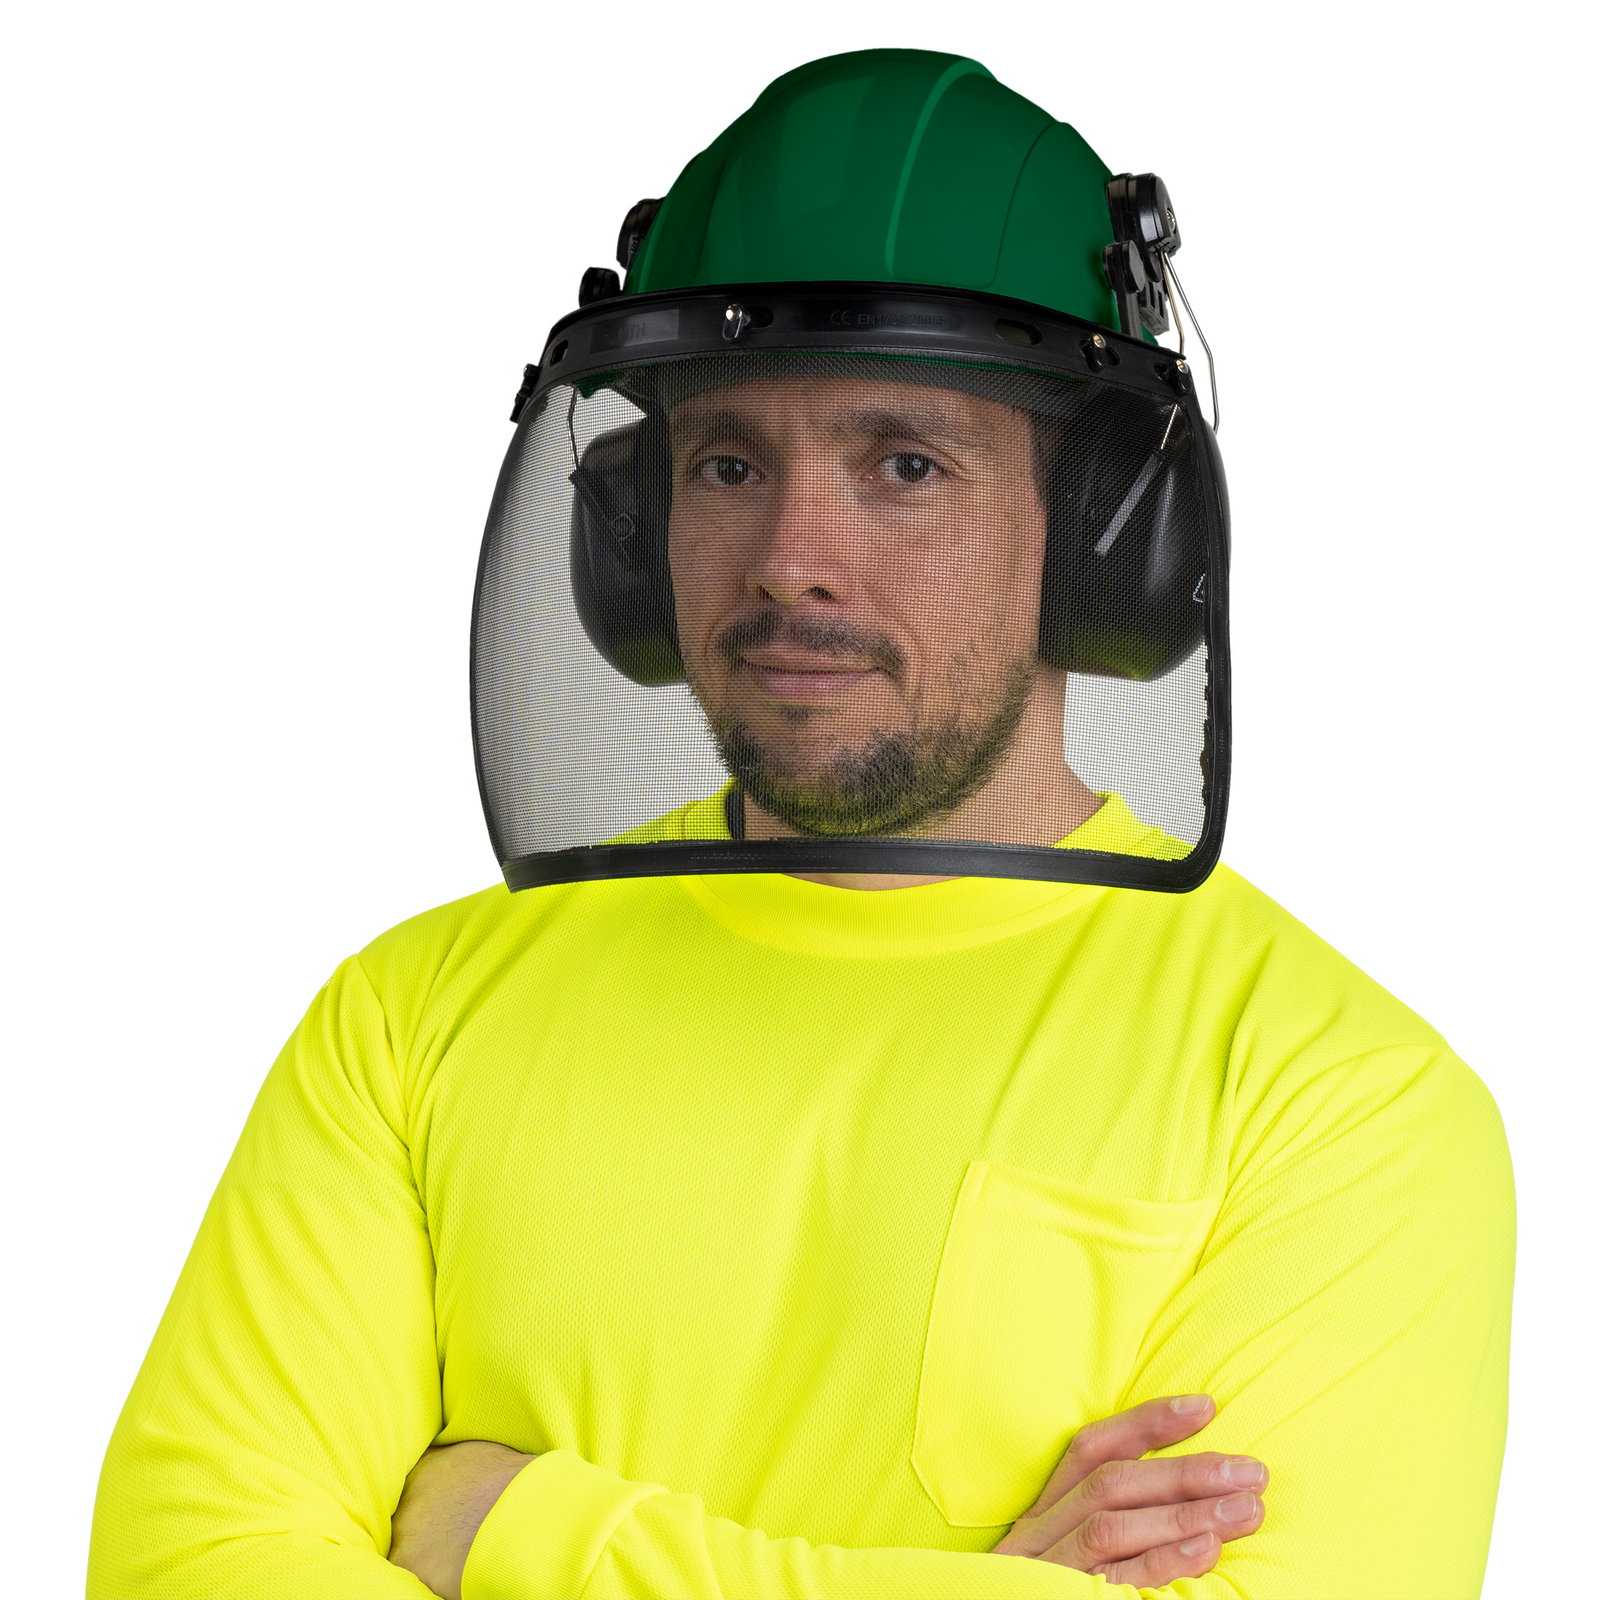 Man wearing a green cap style hard hat safety kit with mounted earmuffs and iron mesh face shield